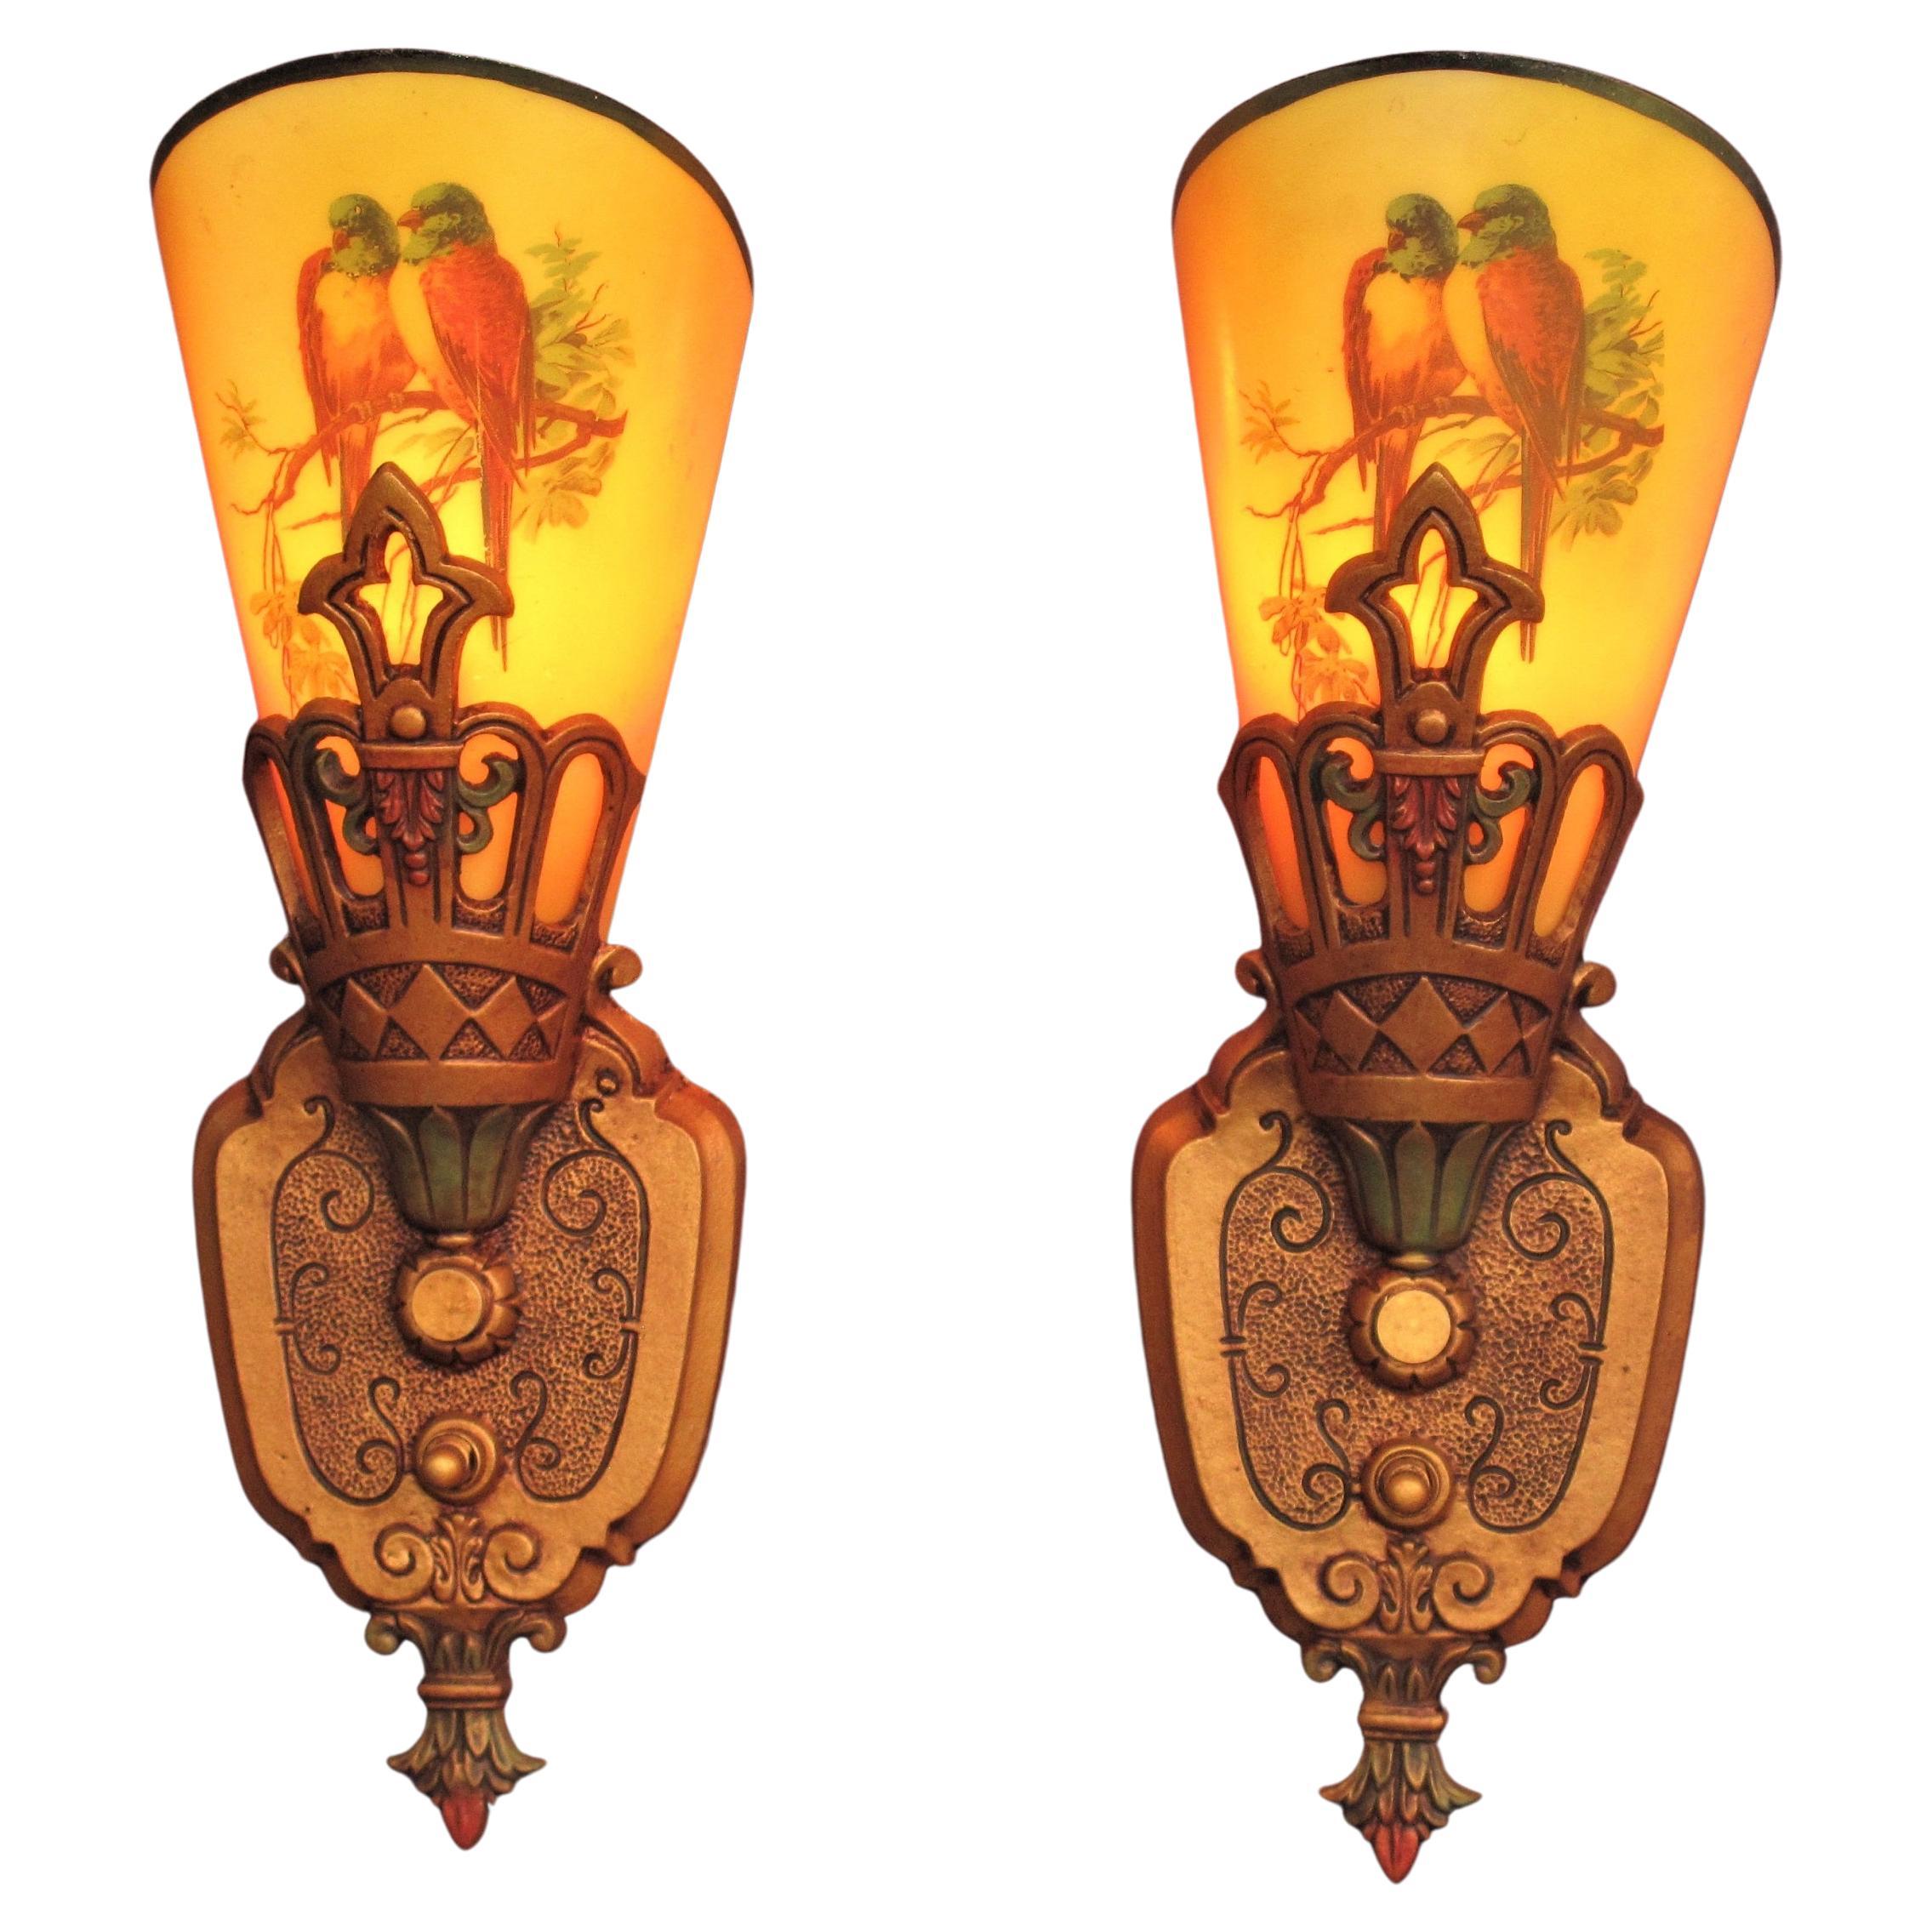 SINGLE ONLY - Not a pair. Vintage Parrot Slip Shade Sconce, Late 1920s